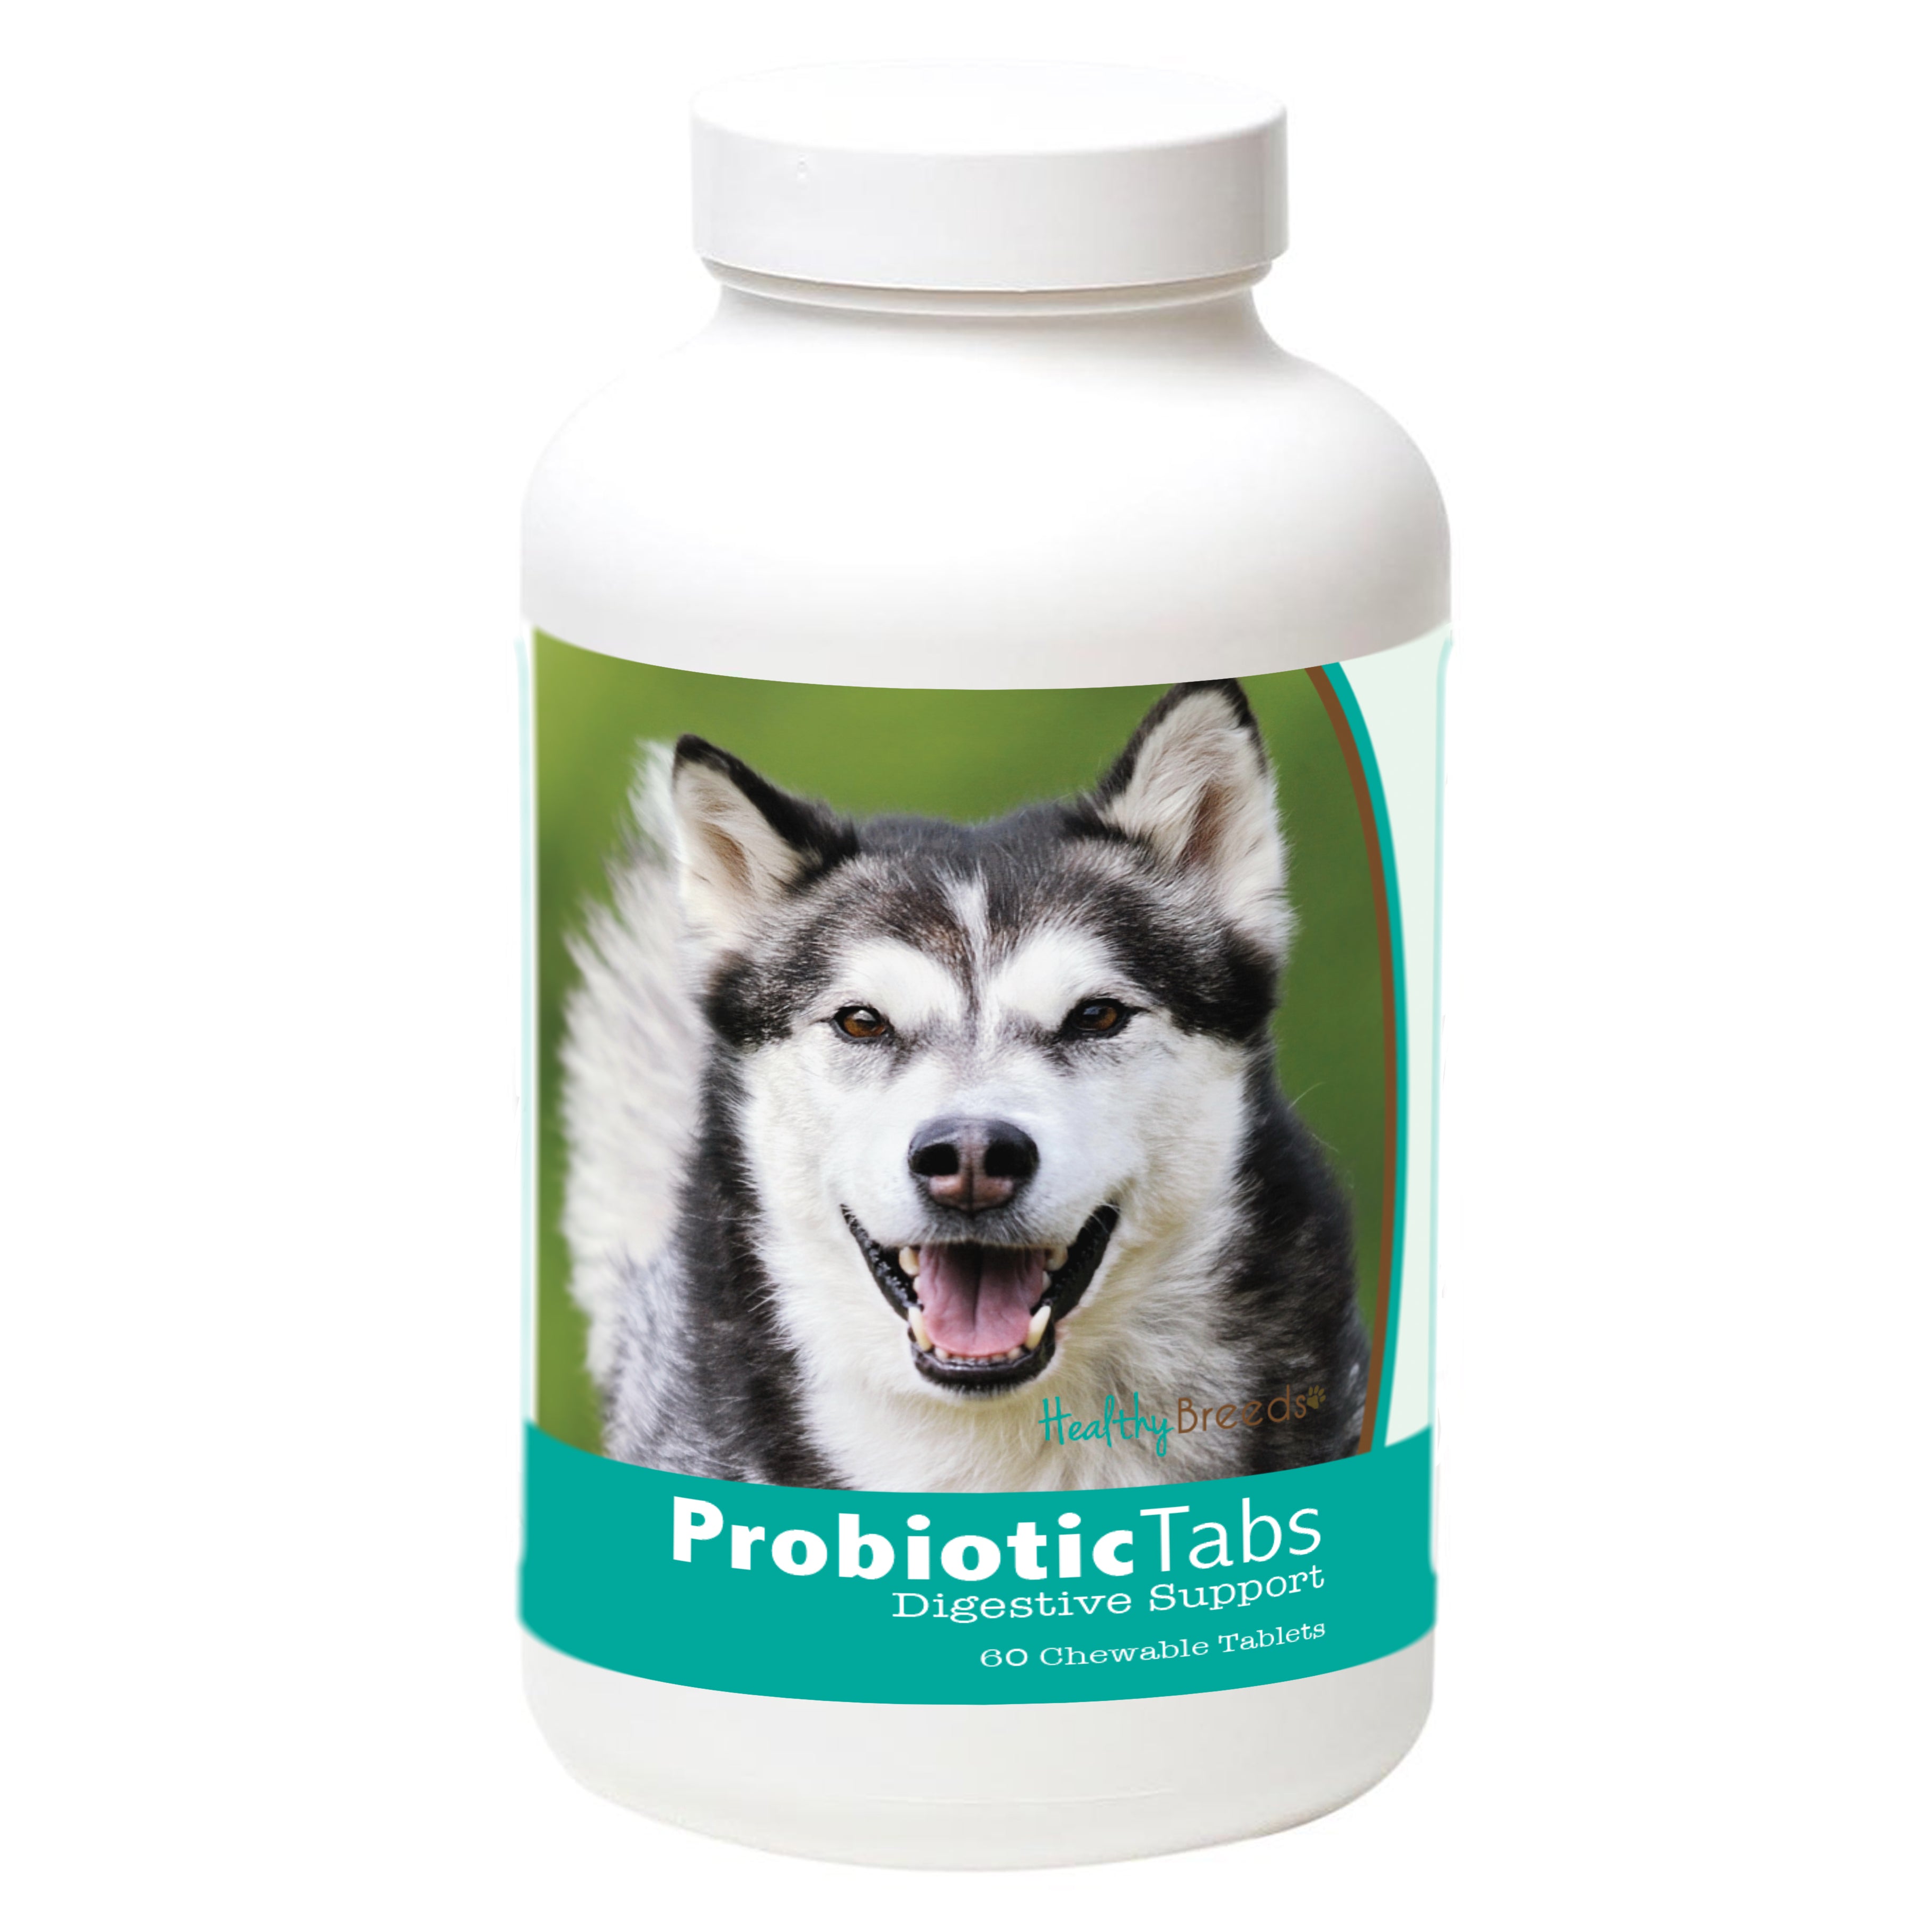 Alaskan Malamute Probiotic and Digestive Support for Dogs 60 Count